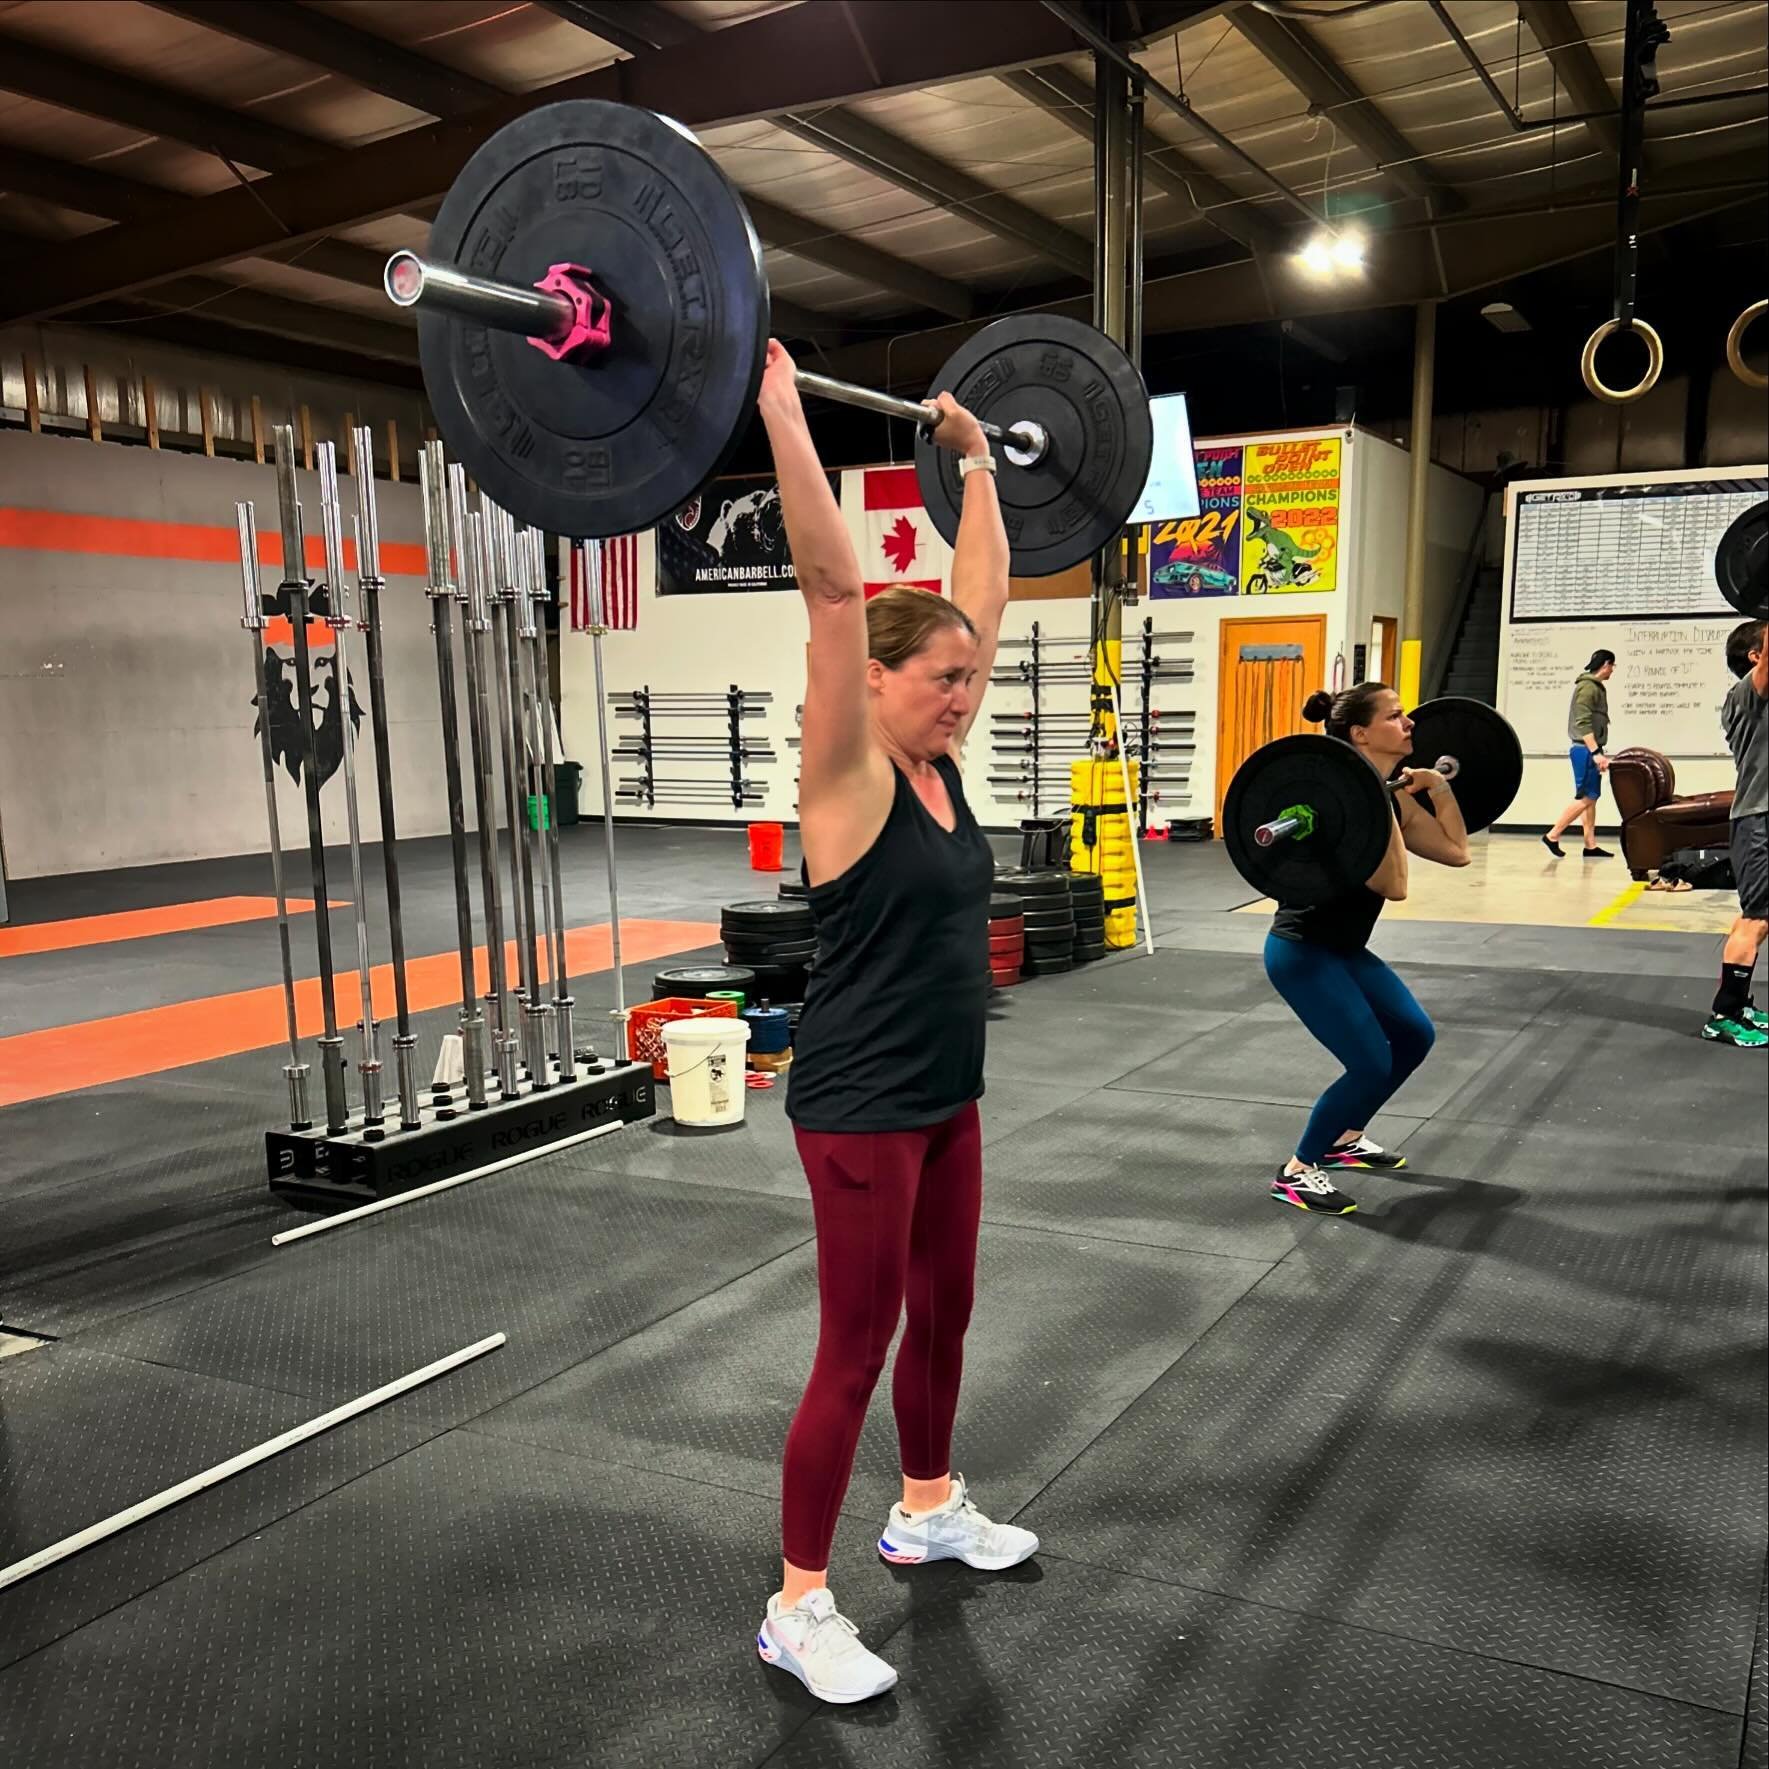 🧱 𝐅𝐨𝐮𝐧𝐝𝐚𝐭𝐢𝐨𝐧 🧱

The key to anything is building a solid foundation. Without it, your house, 🏠 your favorite coffee shop, ☕️ and even your relationships 🤝 would crumble and fall over. 

In CrossFit, we have 9️⃣ foundational movements as 